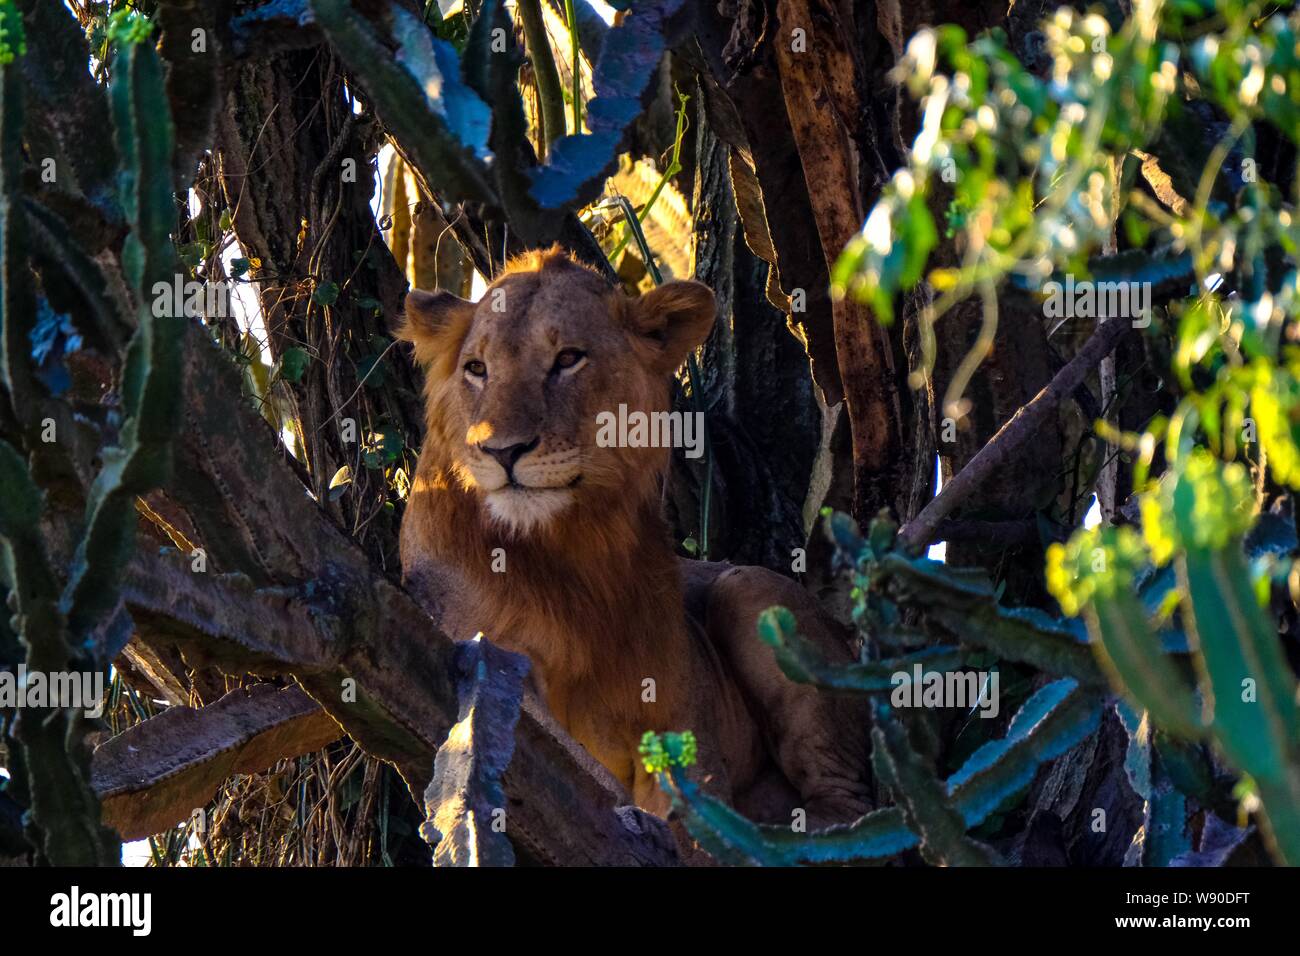 Lion sitting in the middle of trees near cactus on a sunny day Stock Photo